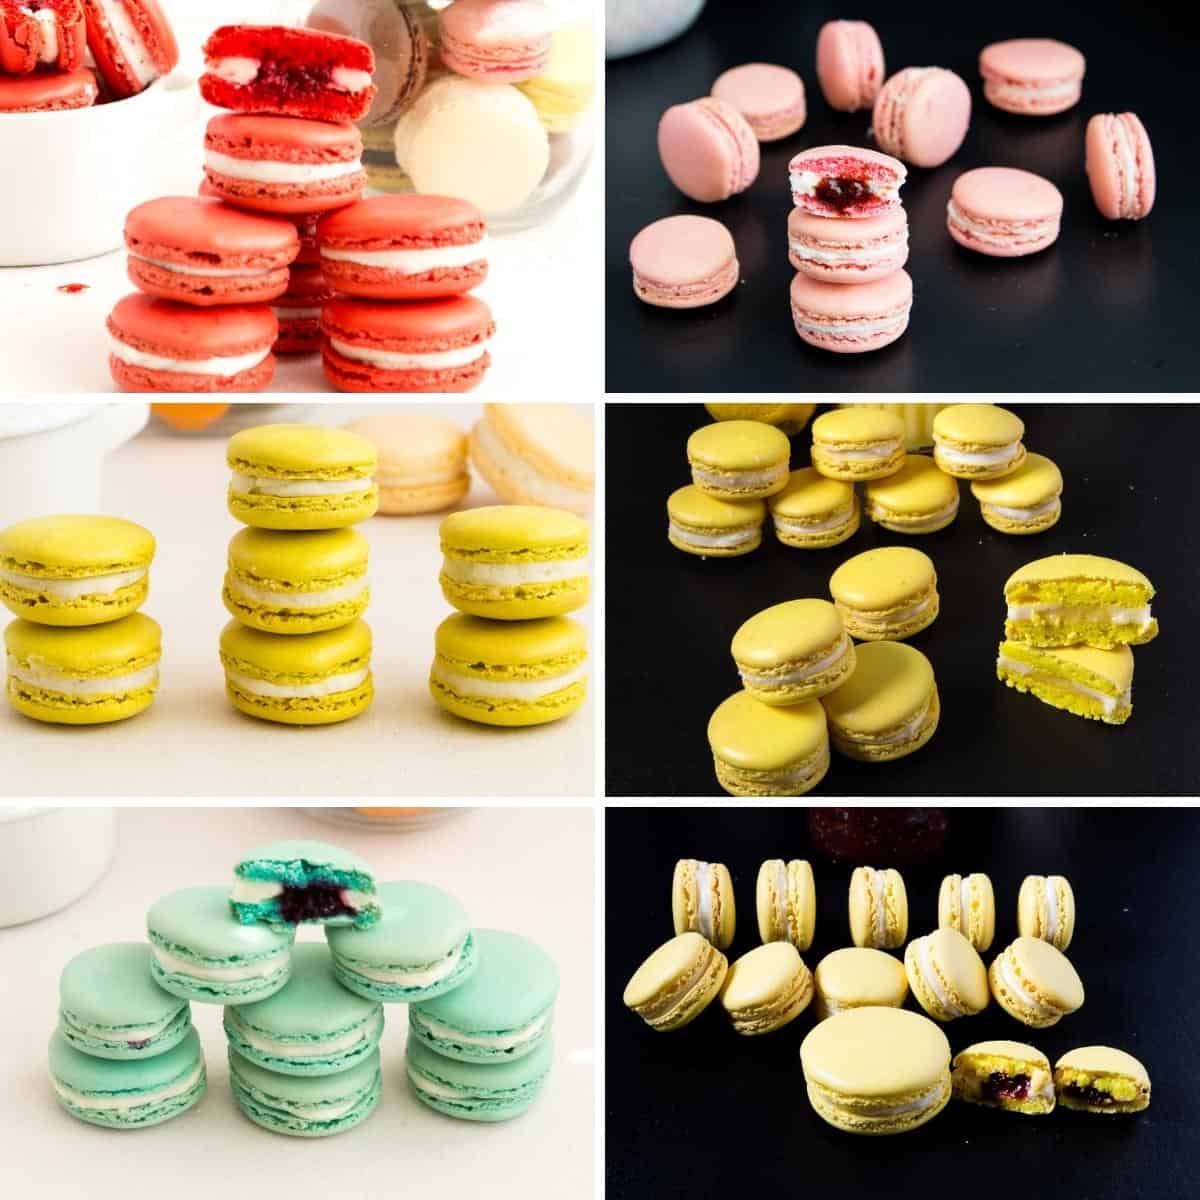 Collage of many different macarons.